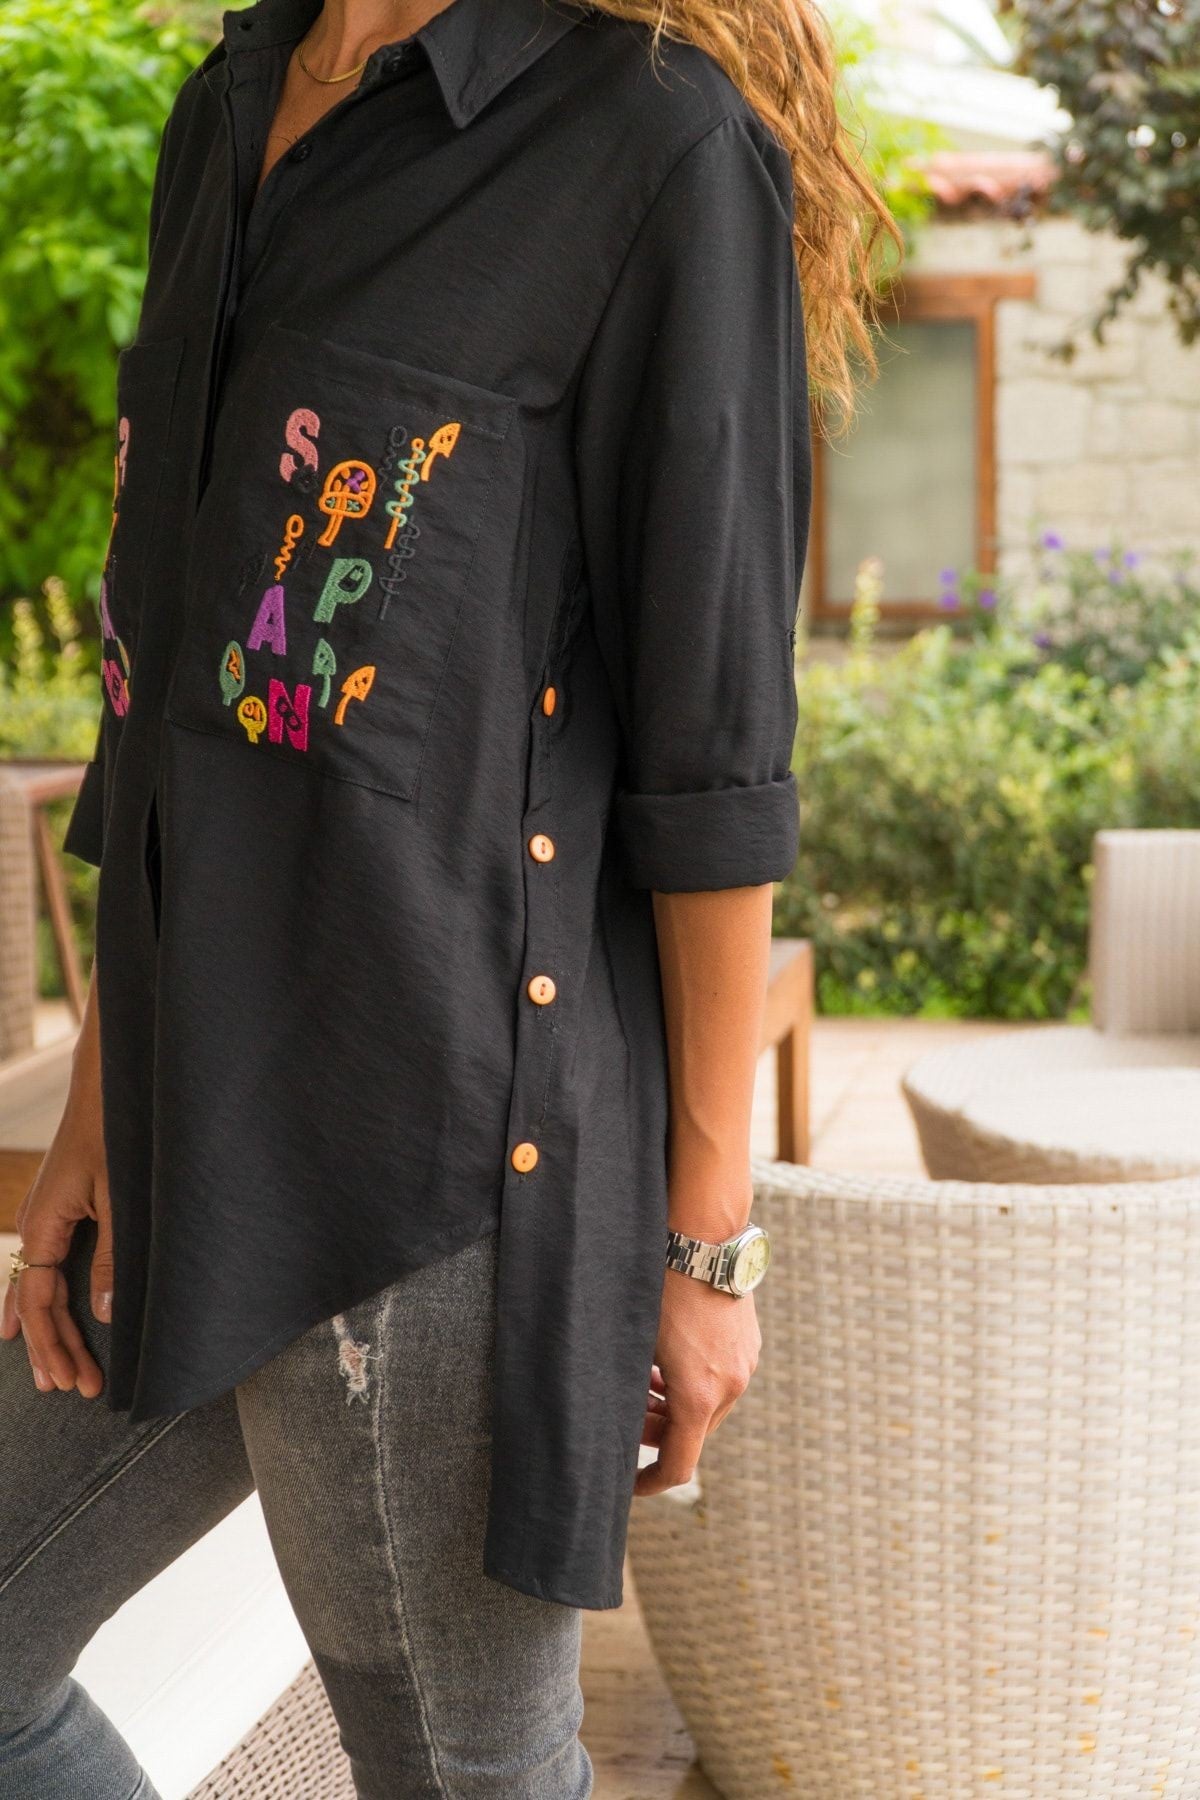 Black Long Women's Shirt - Classic Collar, Long Sleeve, with Embroidery Details on Front Pockets, Cotton, Polyester Fabric